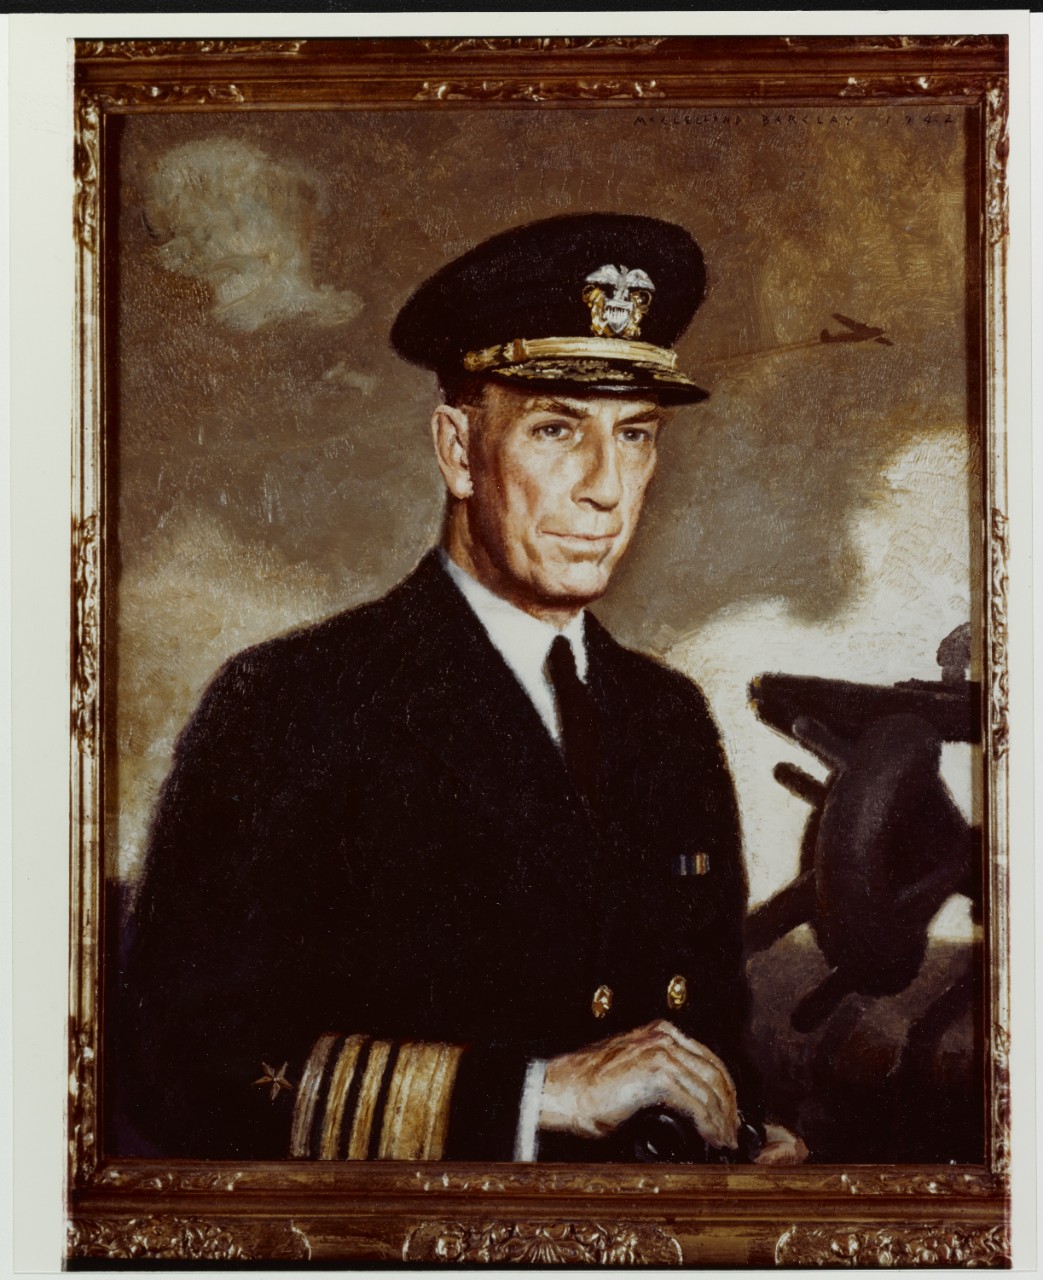 Painting of Admiral Royal E. Ingersoll, USN during World War II